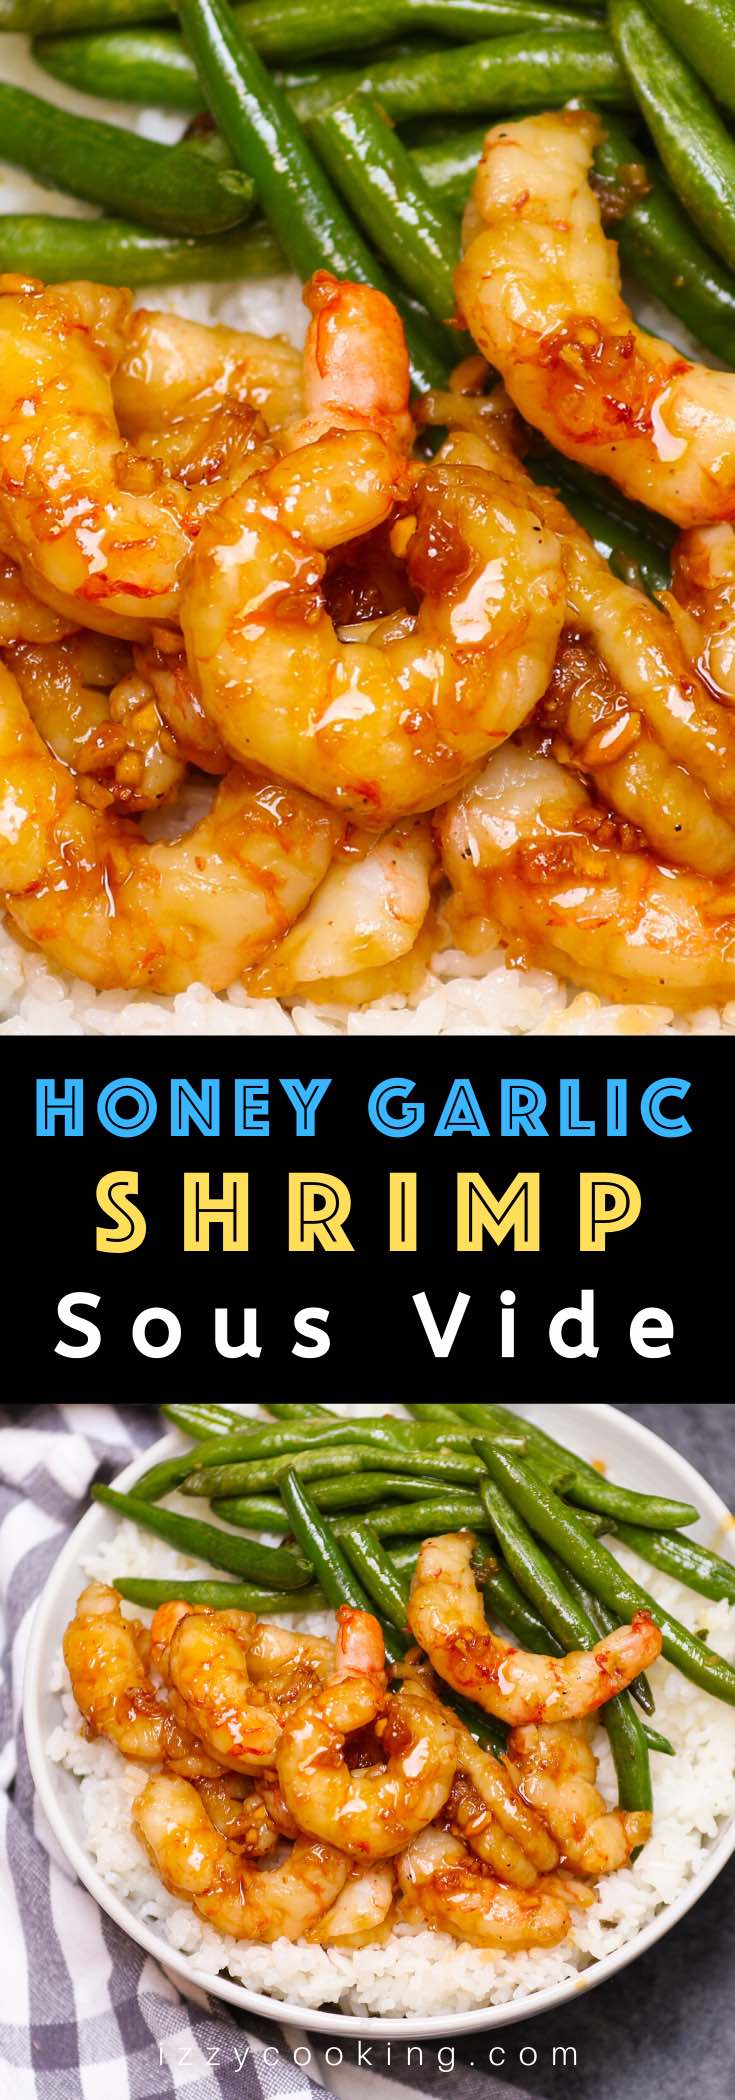 Sous Vide Shrimp Recipe makes the most tender and juicy shrimp that’s impossible to achieve with traditional methods. Ready in 20 minutes, this healthy dinner is so flavorful and lip-smacking delicious with the addictive honey garlic sauce. No more overcooked and chewy shrimp again. You can cook the shrimp from fresh or frozen! #SousVideShrimp